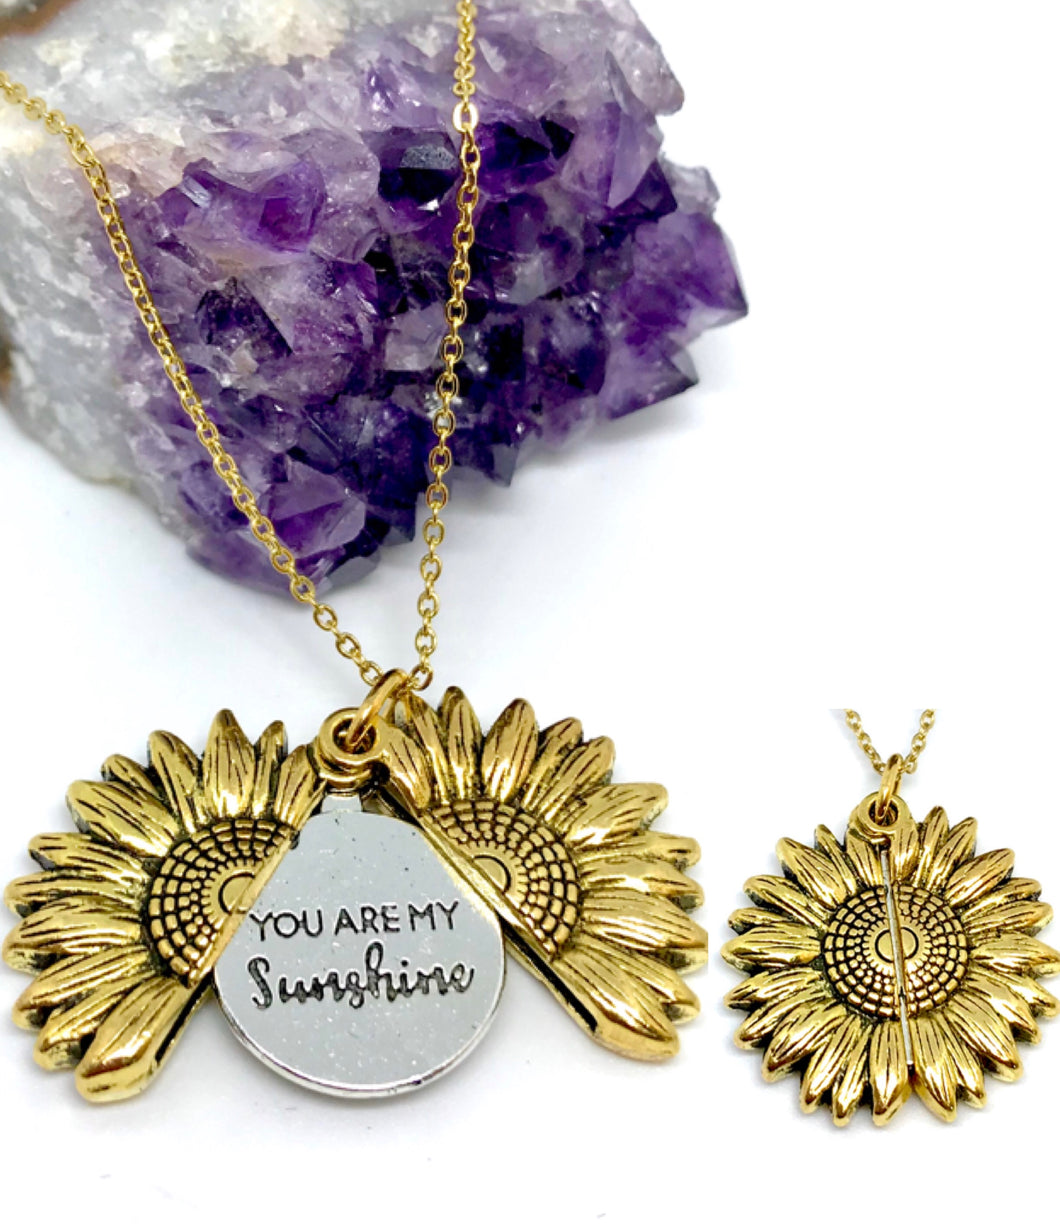 “You are my Sunshine” Sunflower Necklace (Gold Stainless Steel)